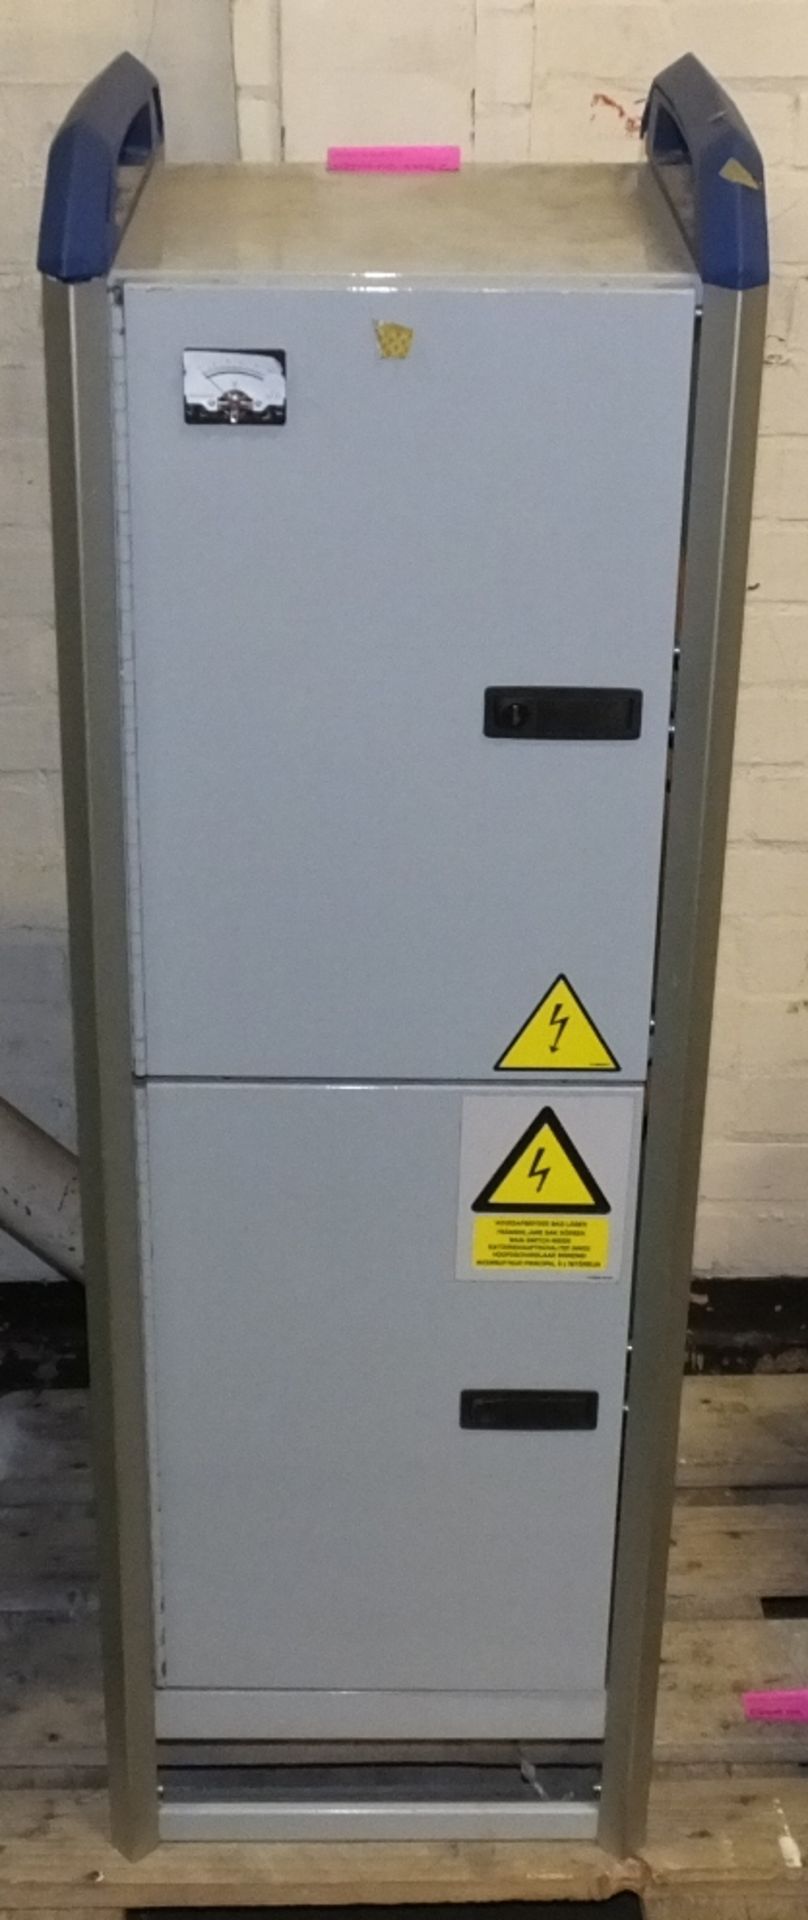 Electric Generator Power Unit - Batteries OK but are out of date